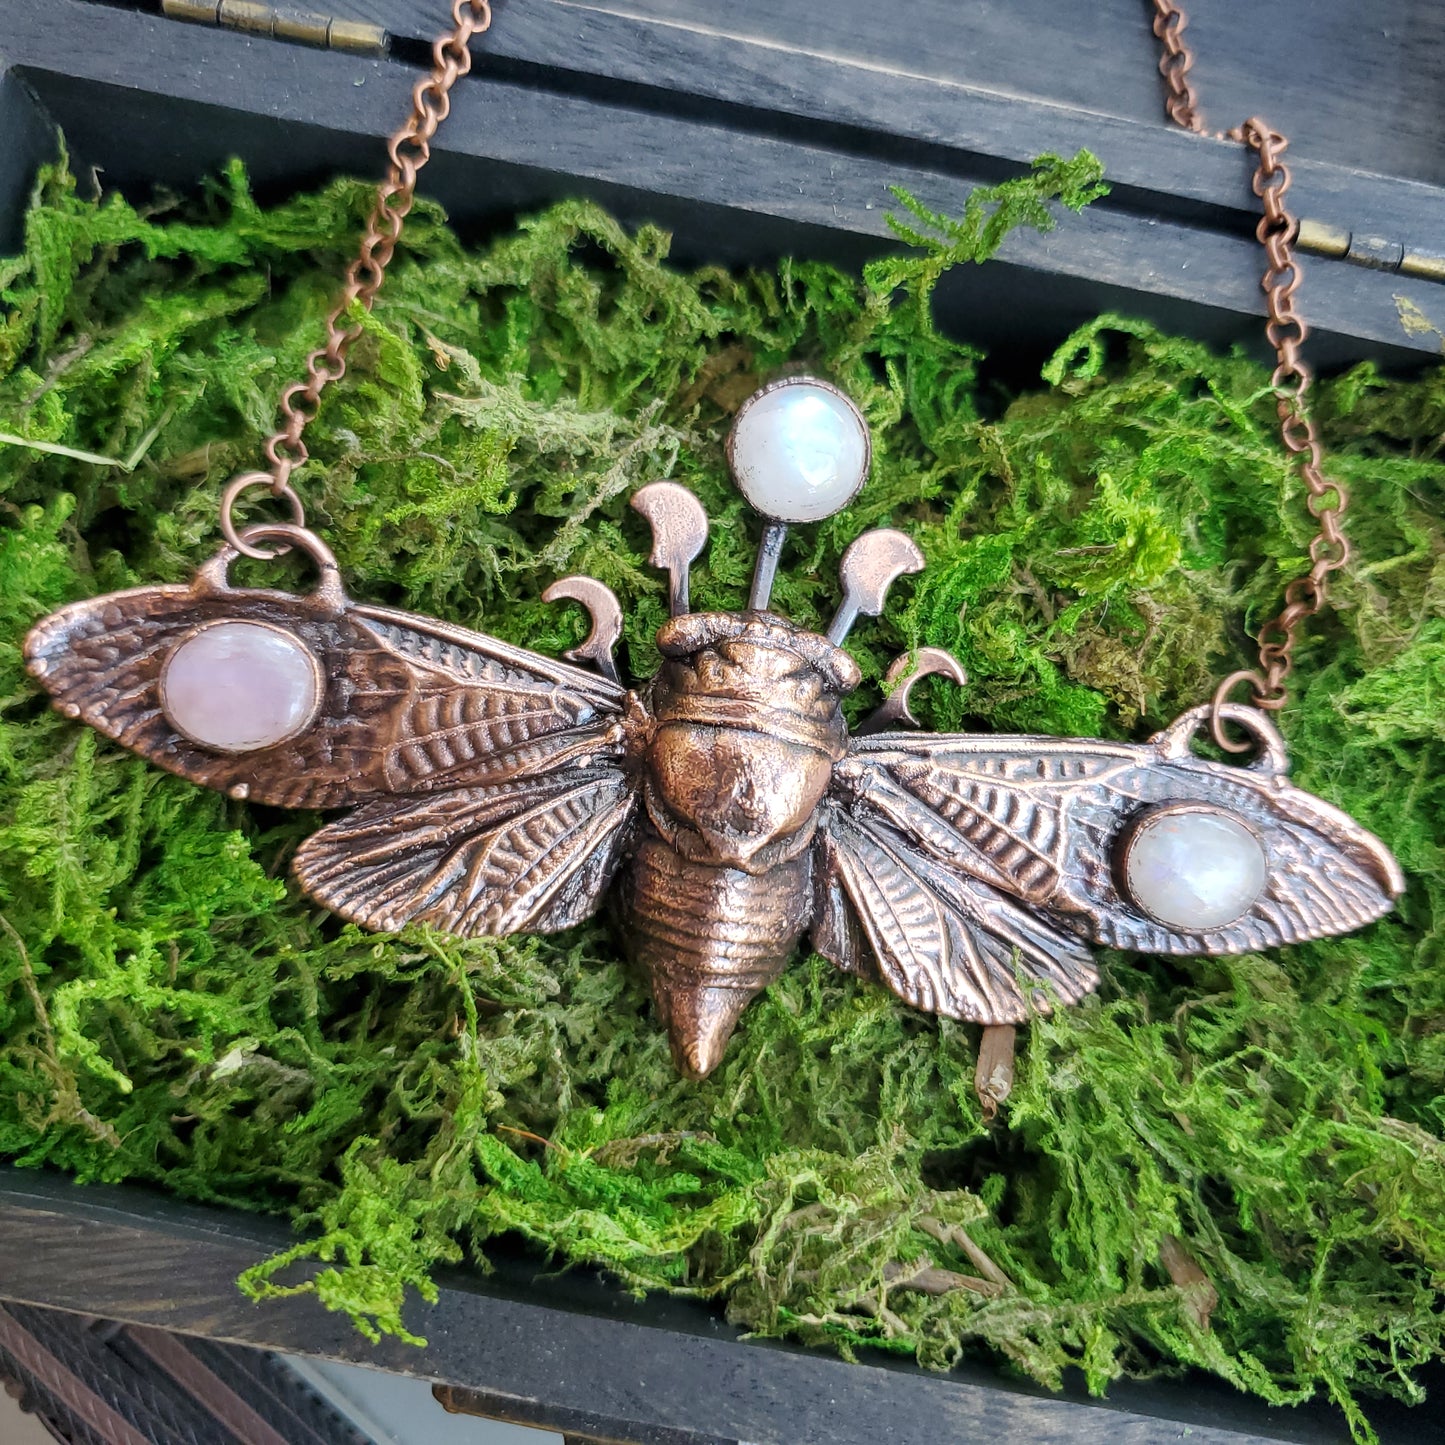 Summer Nights Collection - Full Moon Cicada Necklace